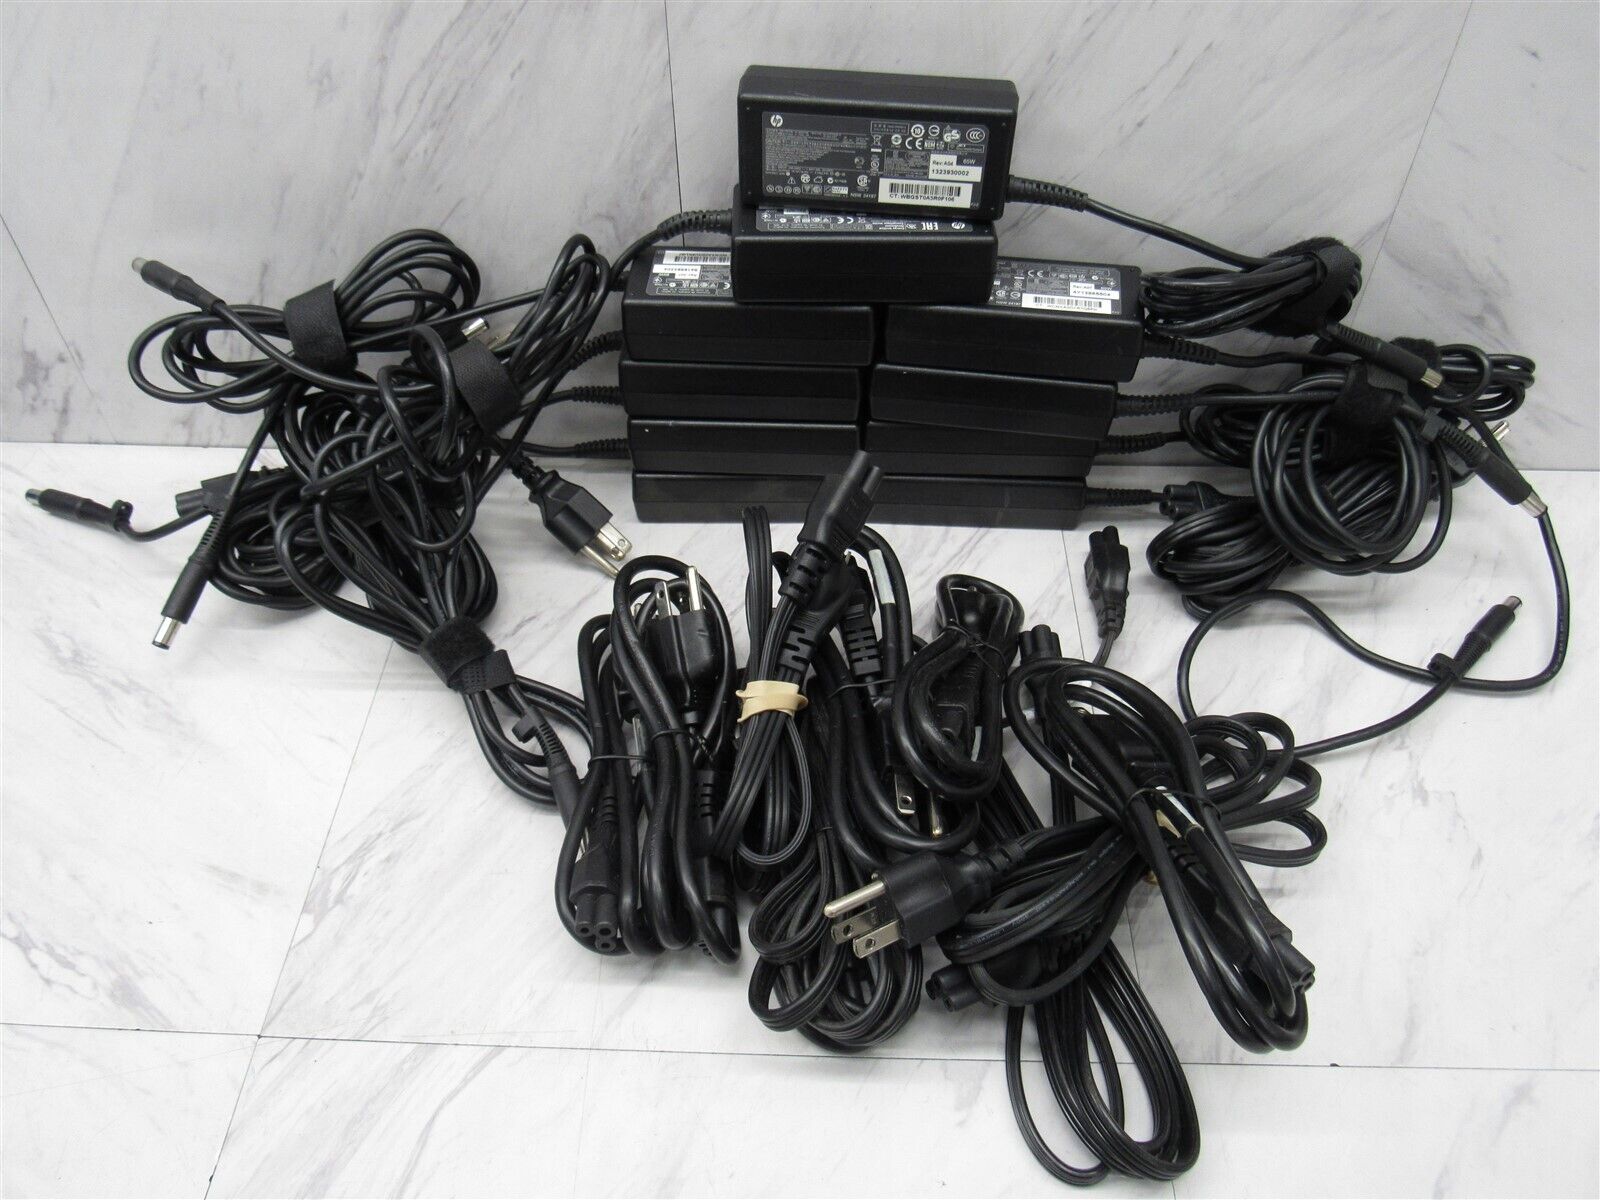 10 LOT - Genuine HP 65W 18.5V 3.5A Laptop Adapter Charger PPP009L-E Power Supply